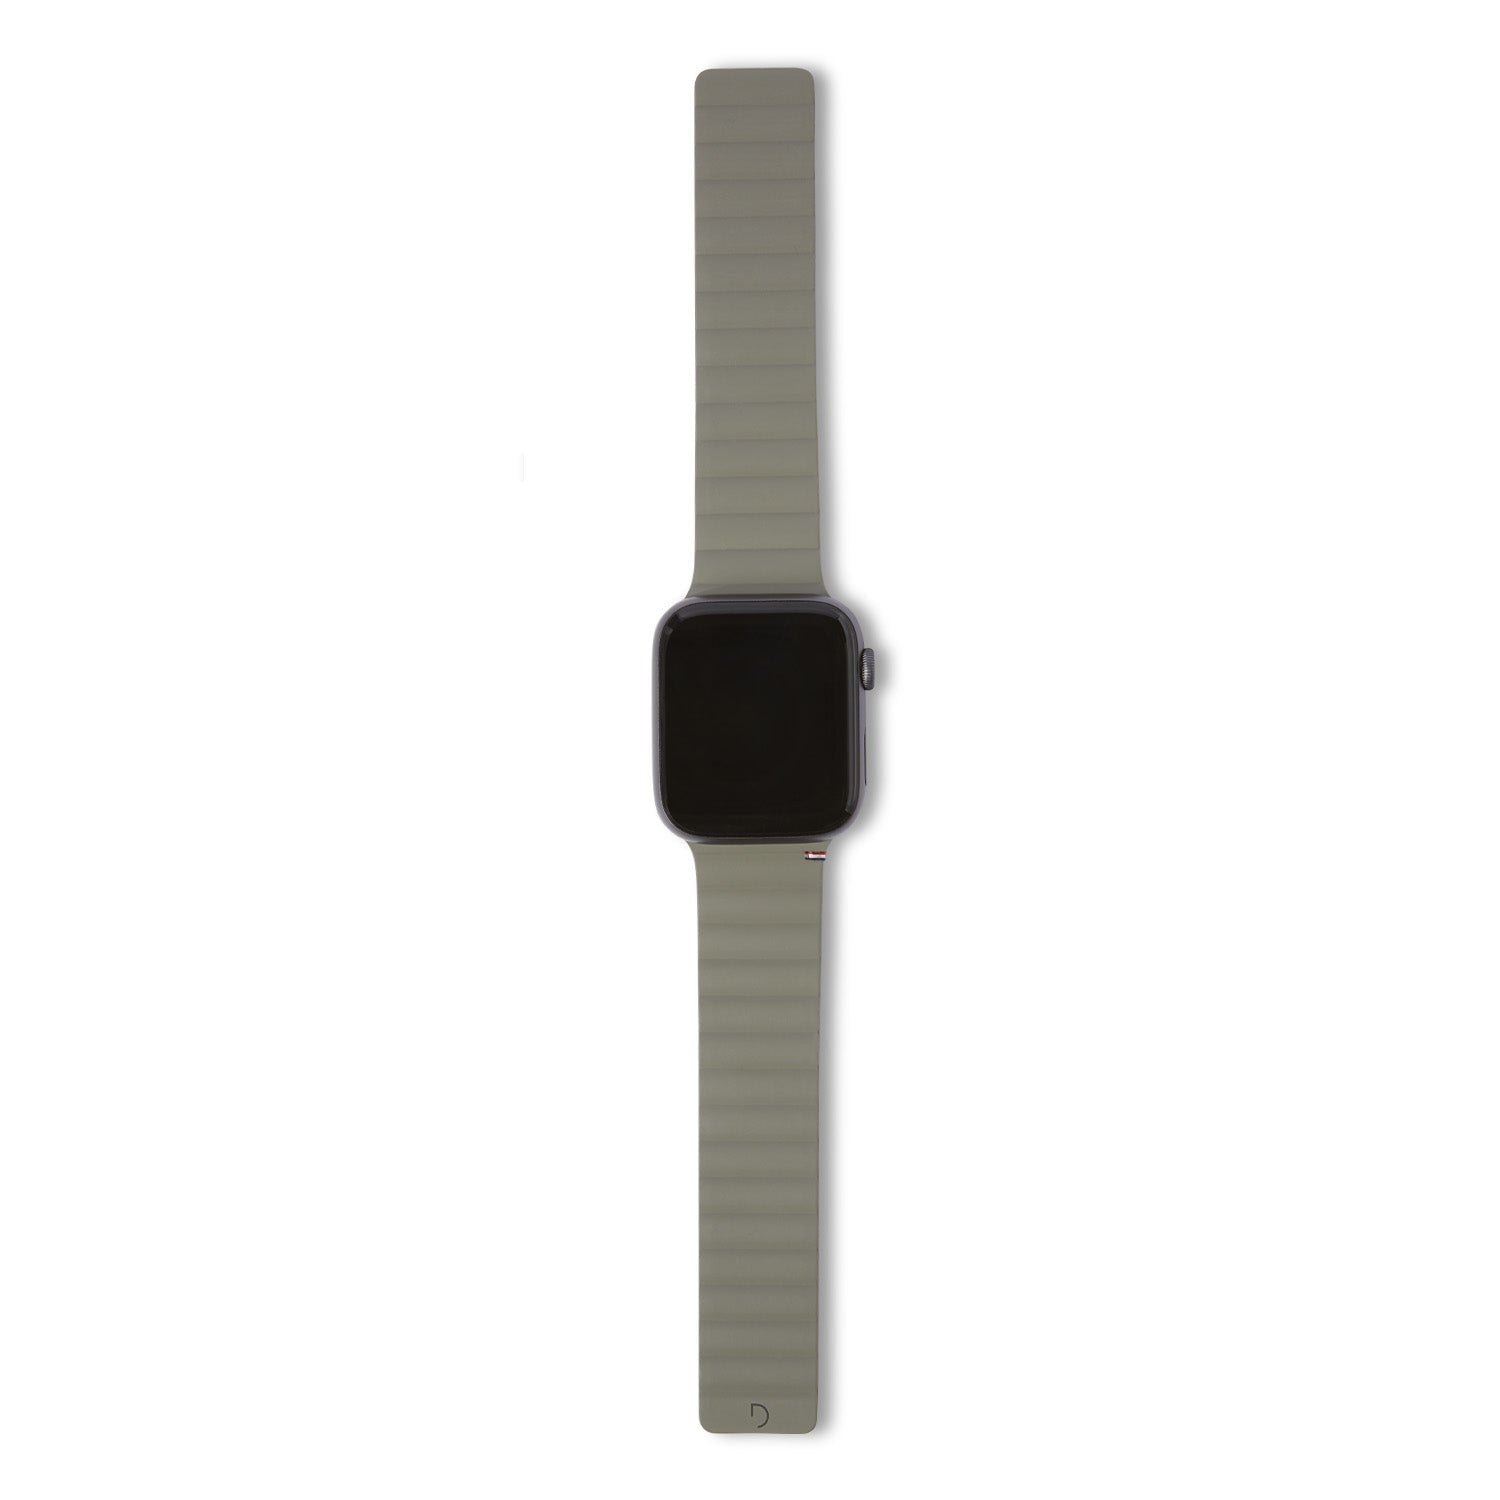 Silicone Magnetic Traction Strap Lite Apple Watch 45mm Series 7, Olive